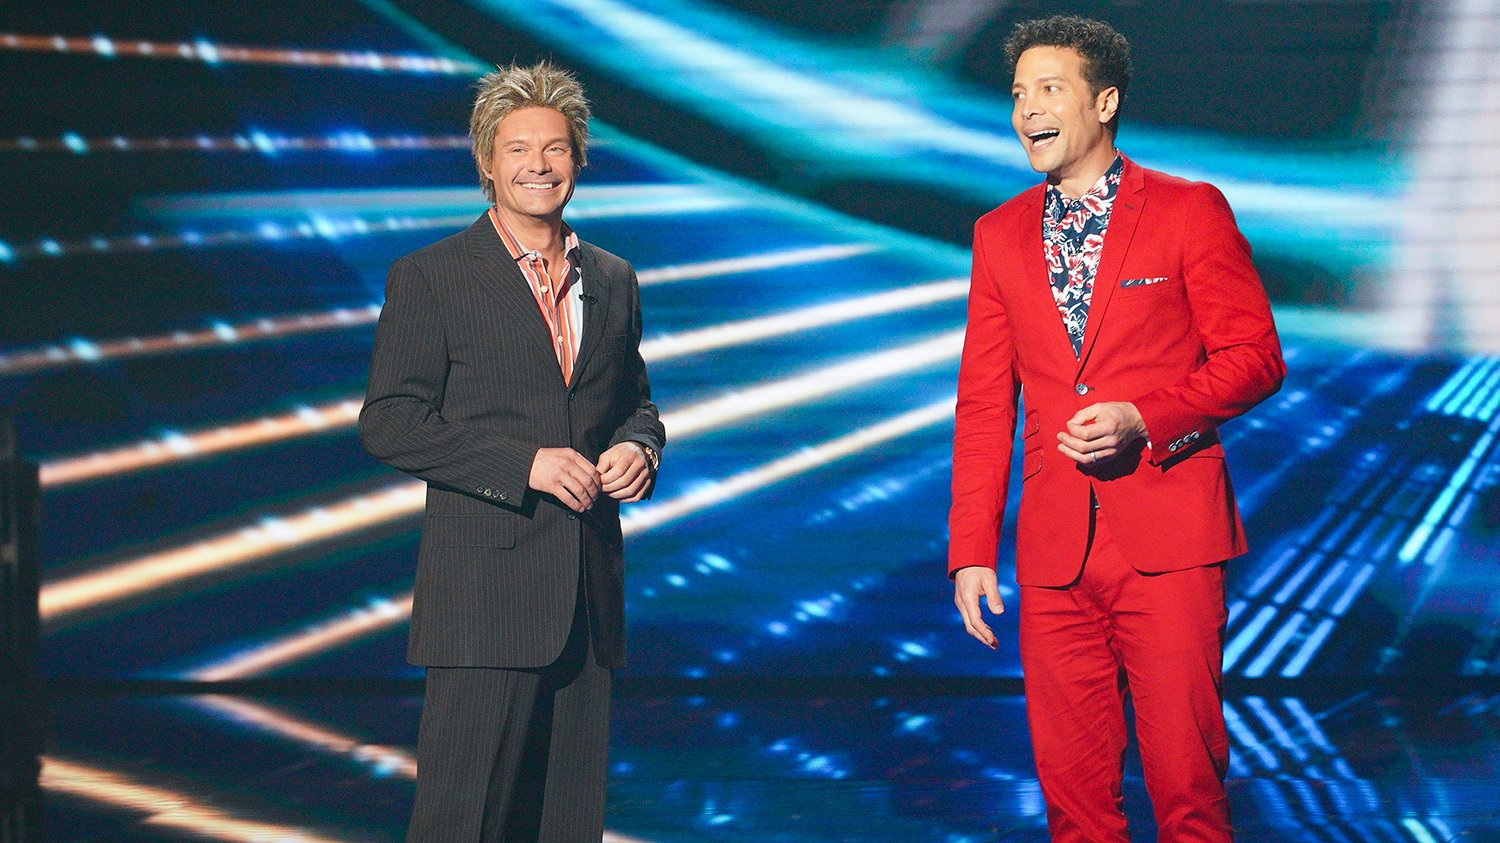 Ryan Seacrest and Justin Guarini at the American Idol 20th Reunion